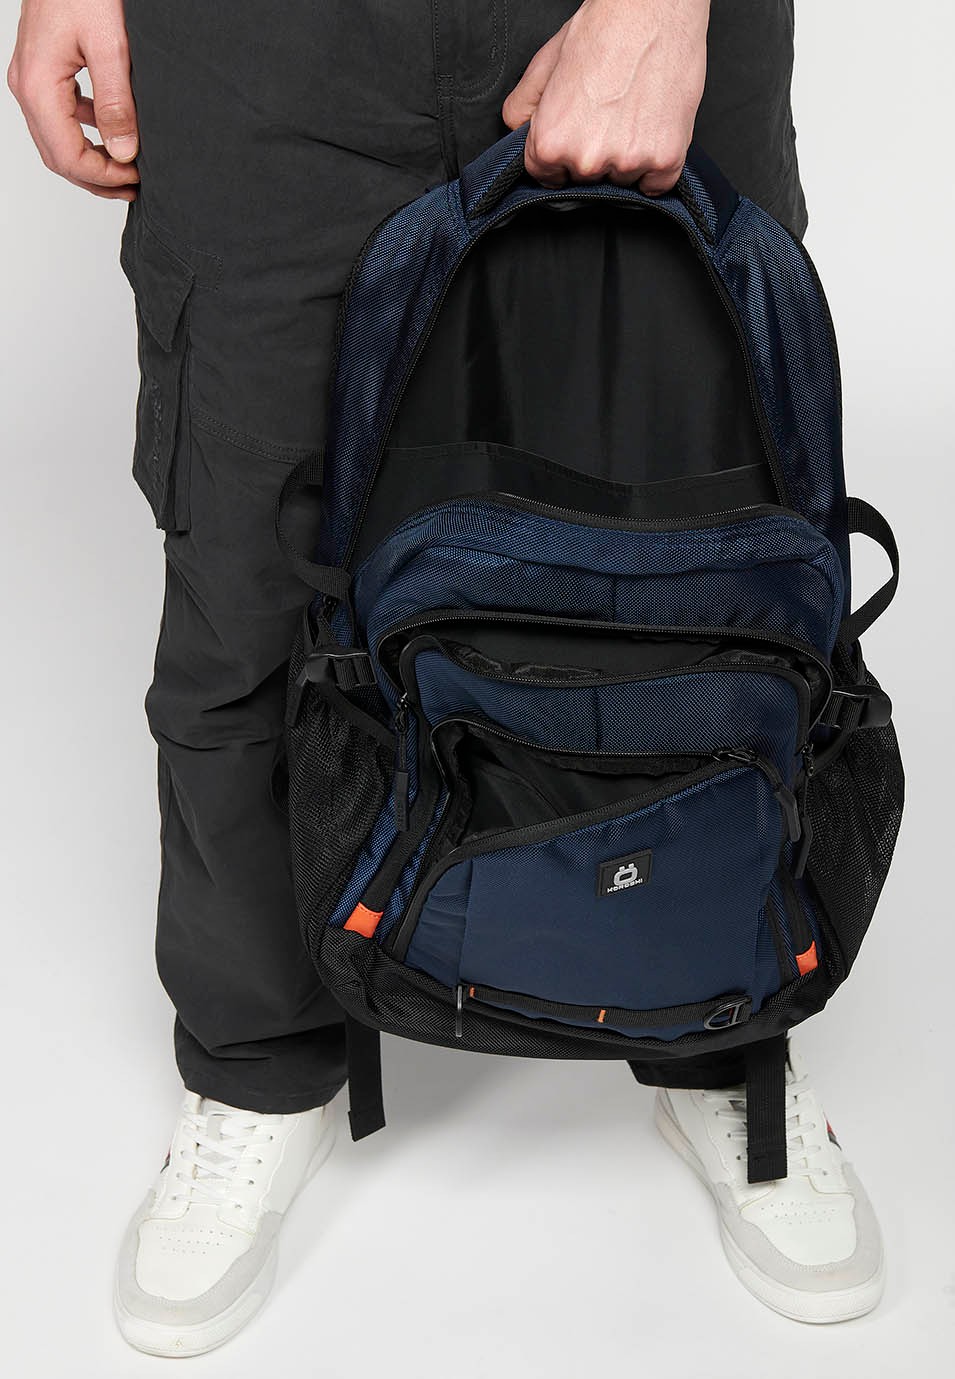 Koröshi backpack with three zippered compartments, one for a laptop, with Navy interior pockets 8